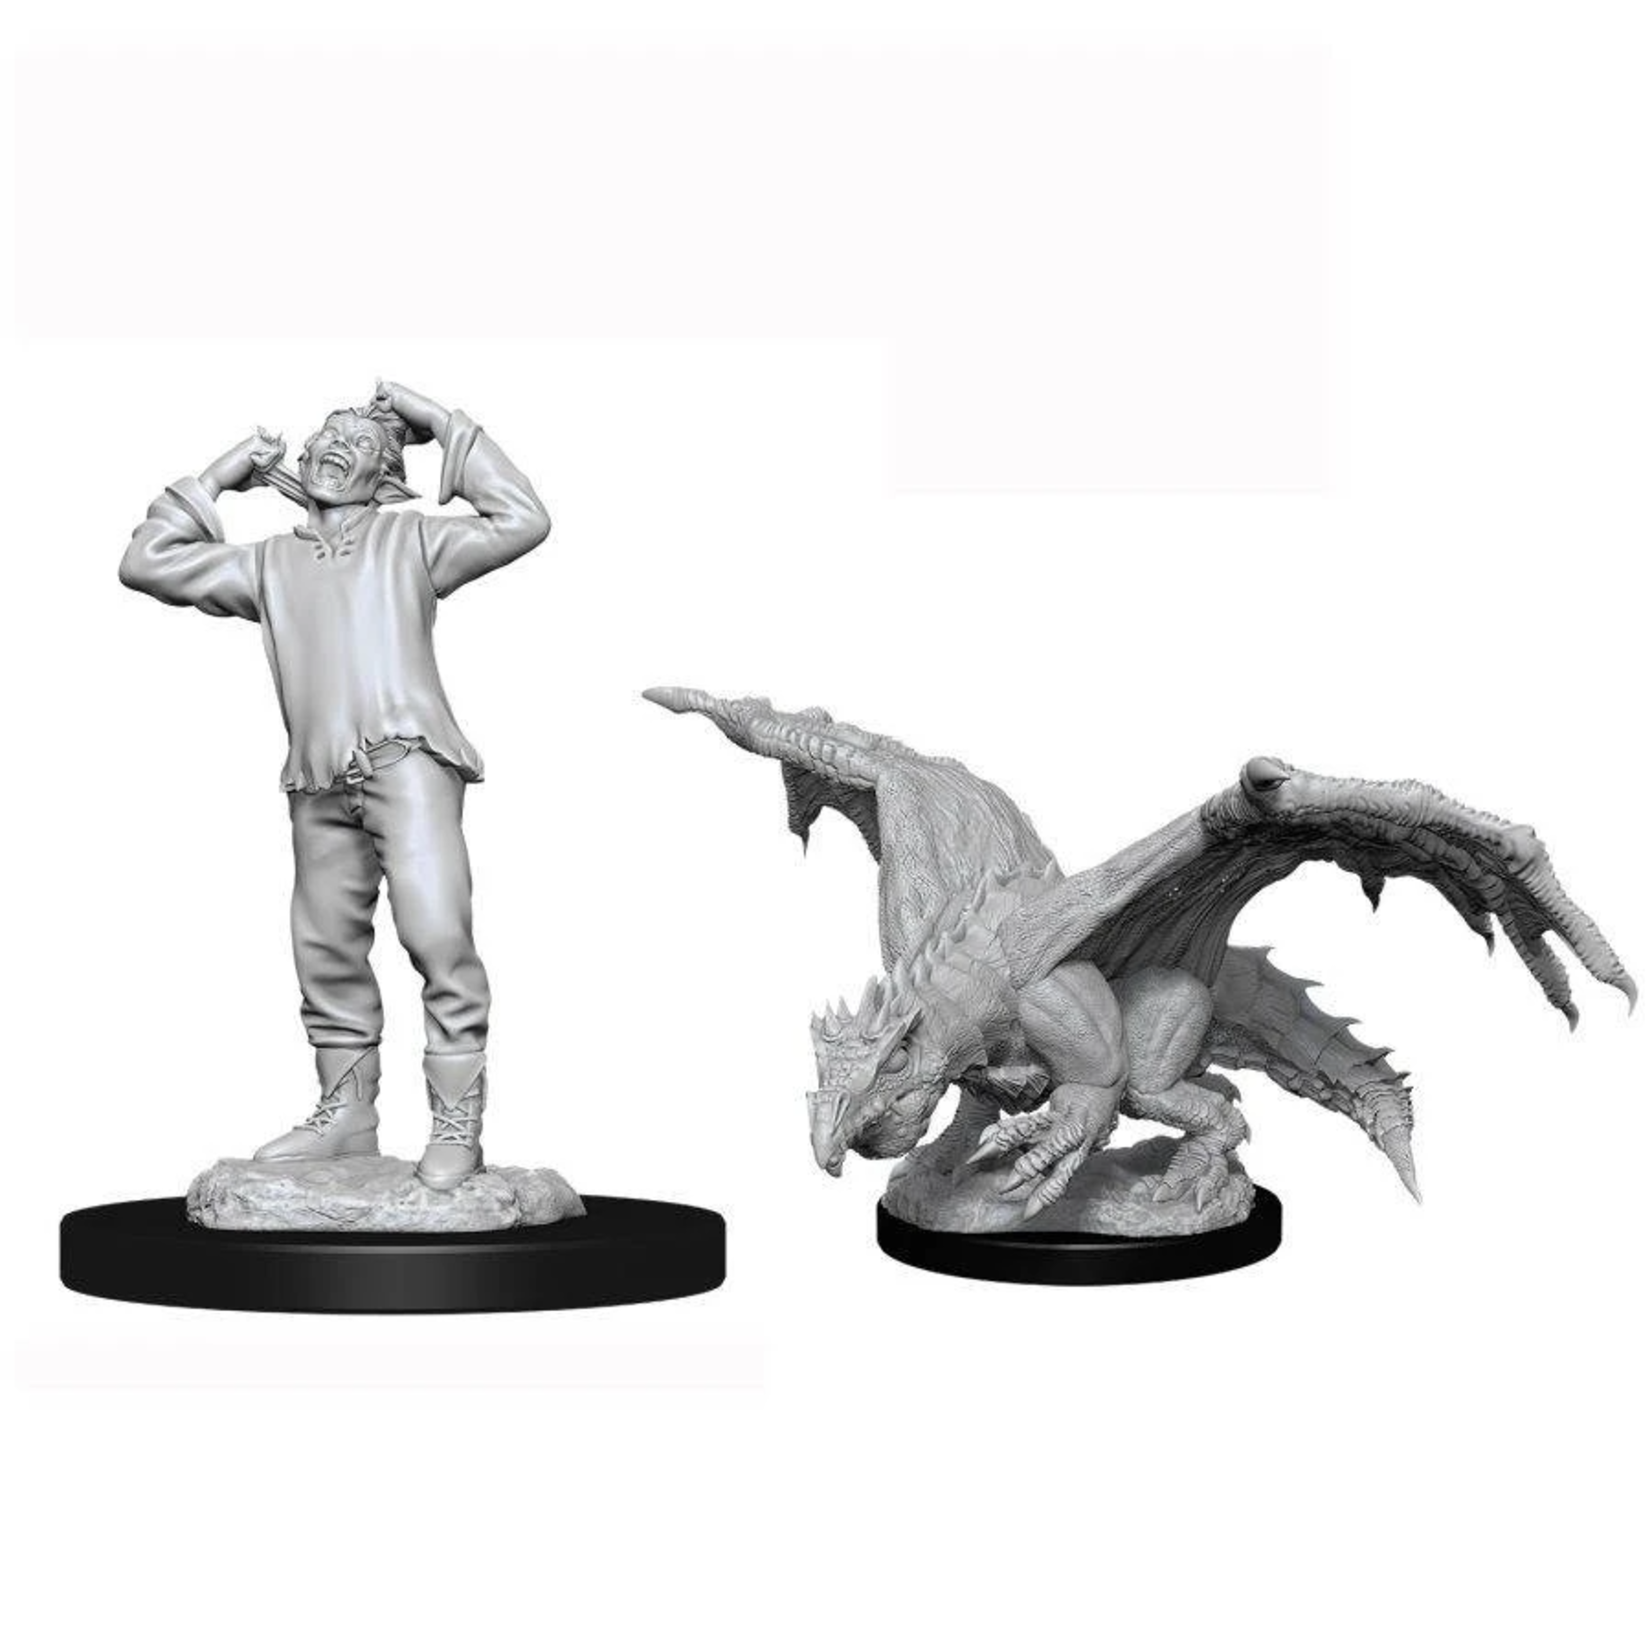 WizKids Dungeons and Dragons Nolzur's Marvelous Minis Green Dragon Wyrmling